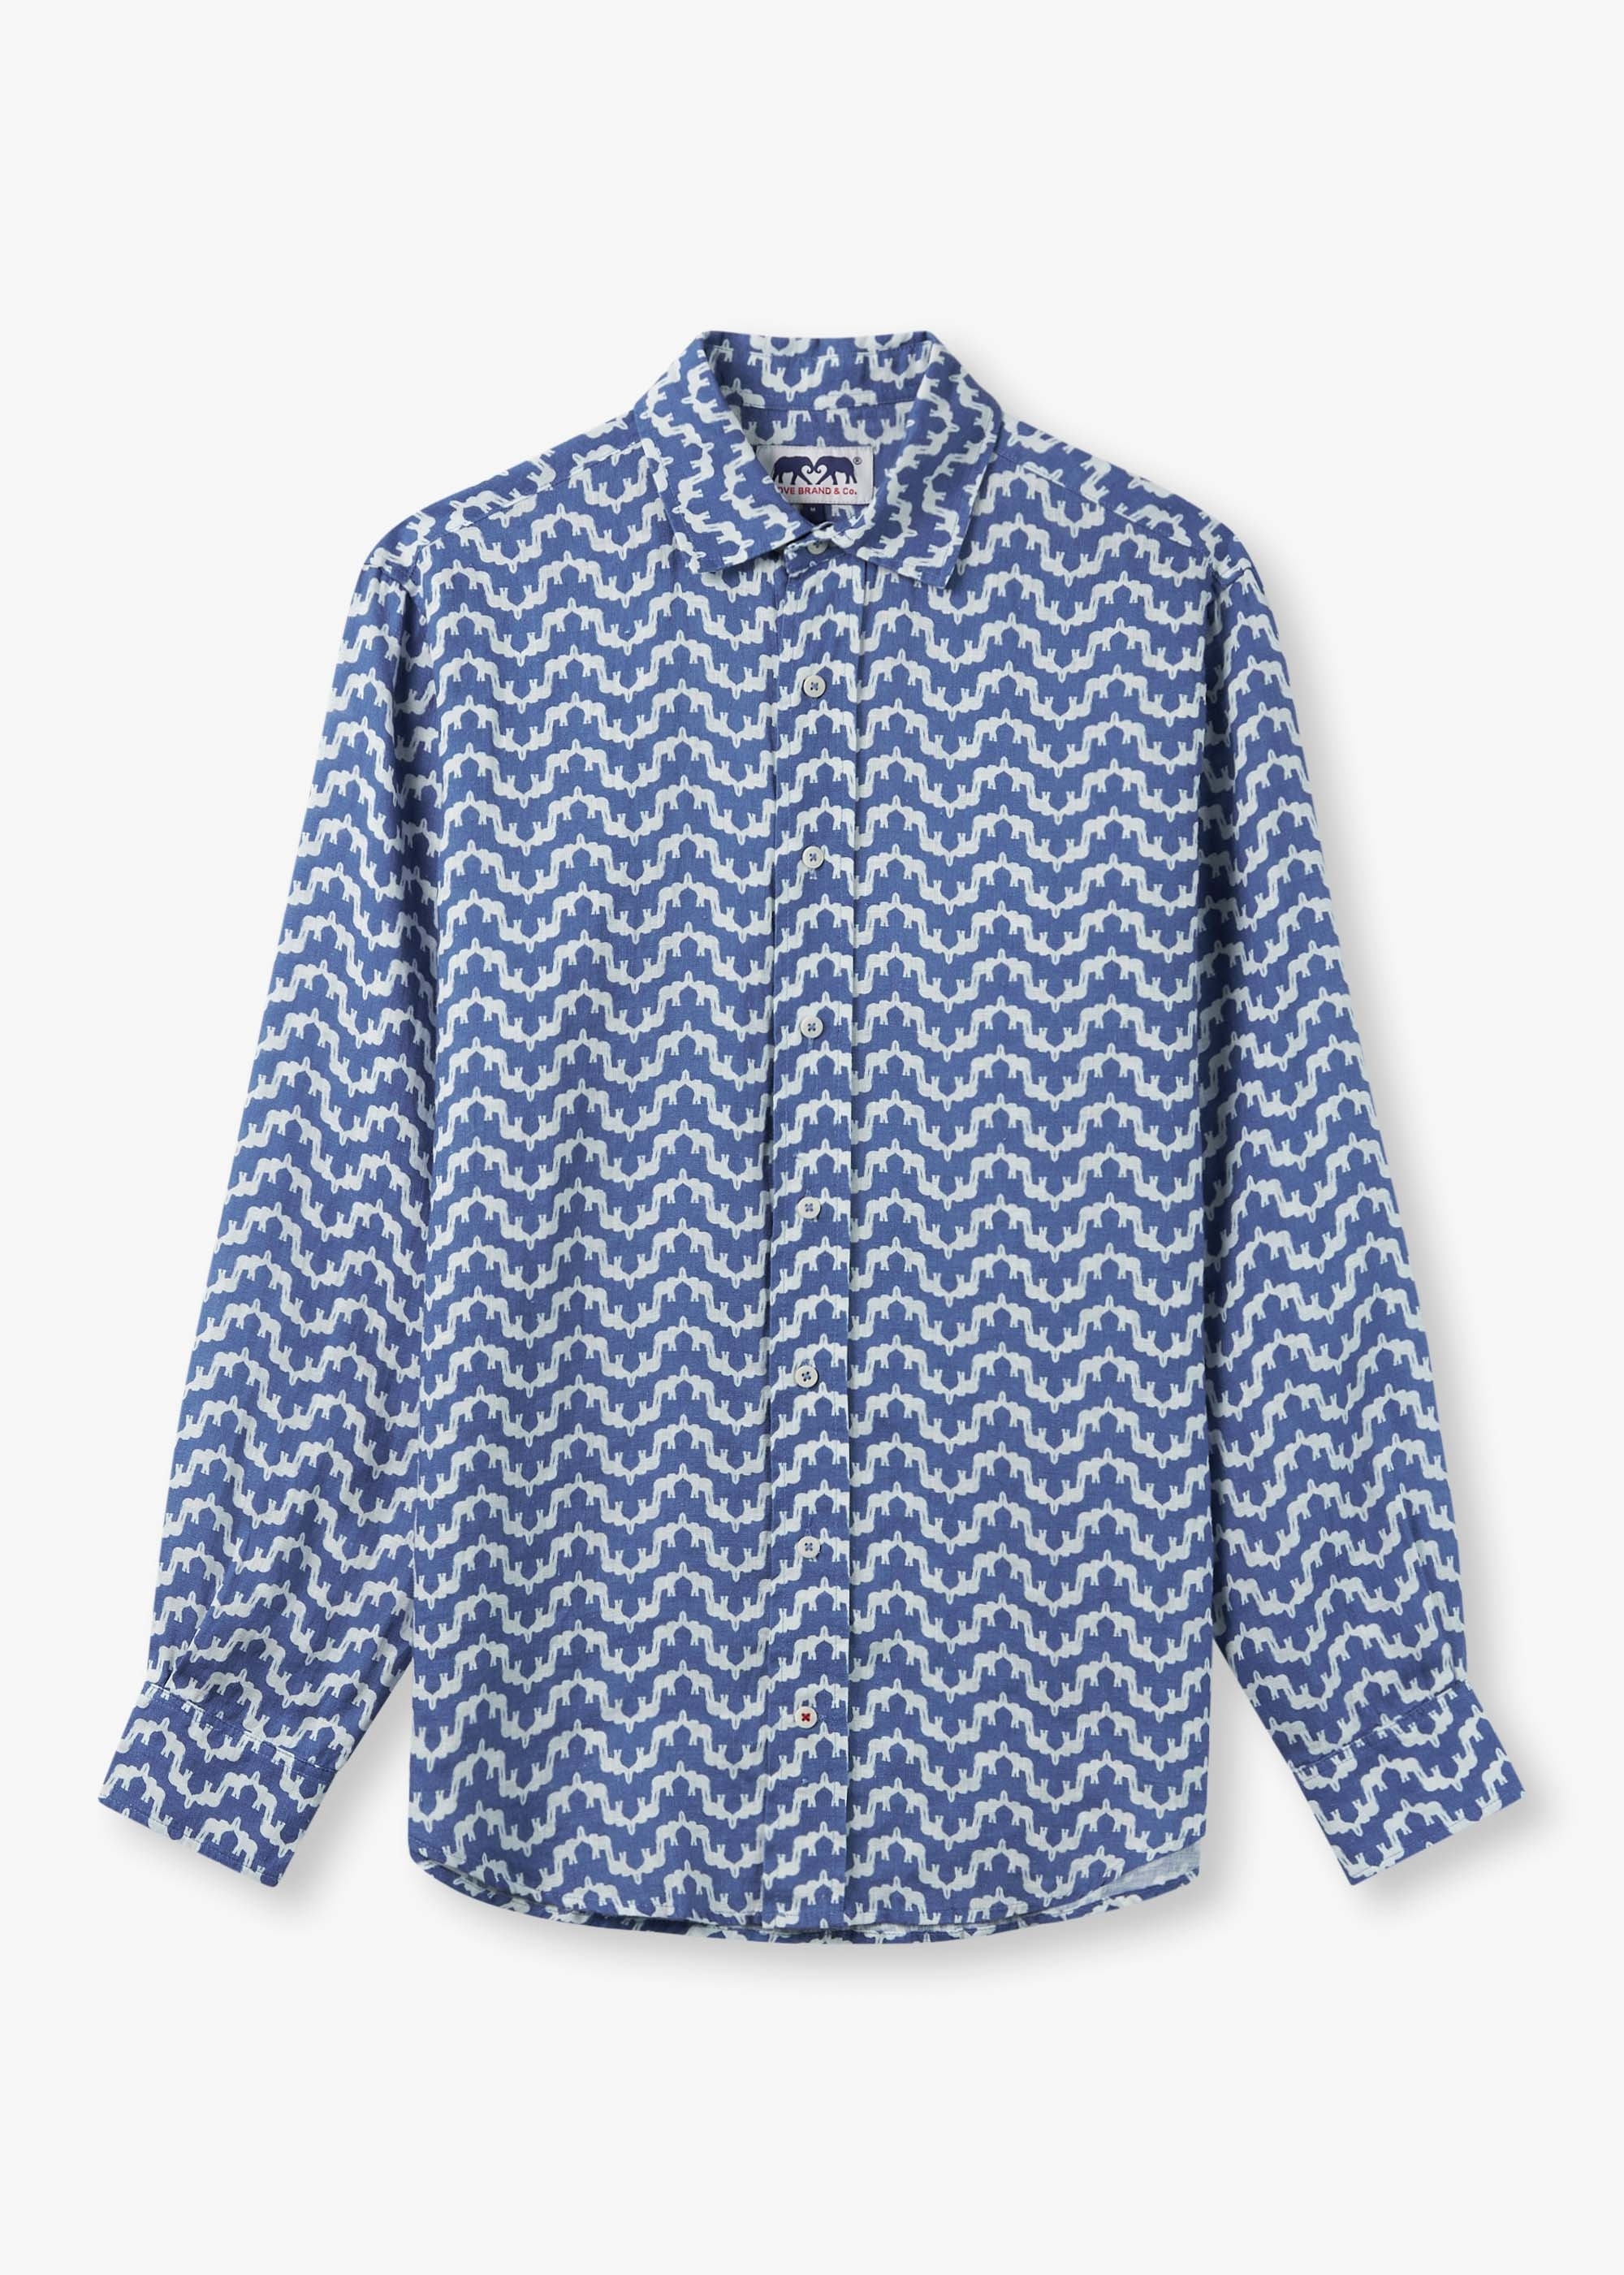 LOVE BRAND Mens Abaco Printed Shirt In Elephant Palace